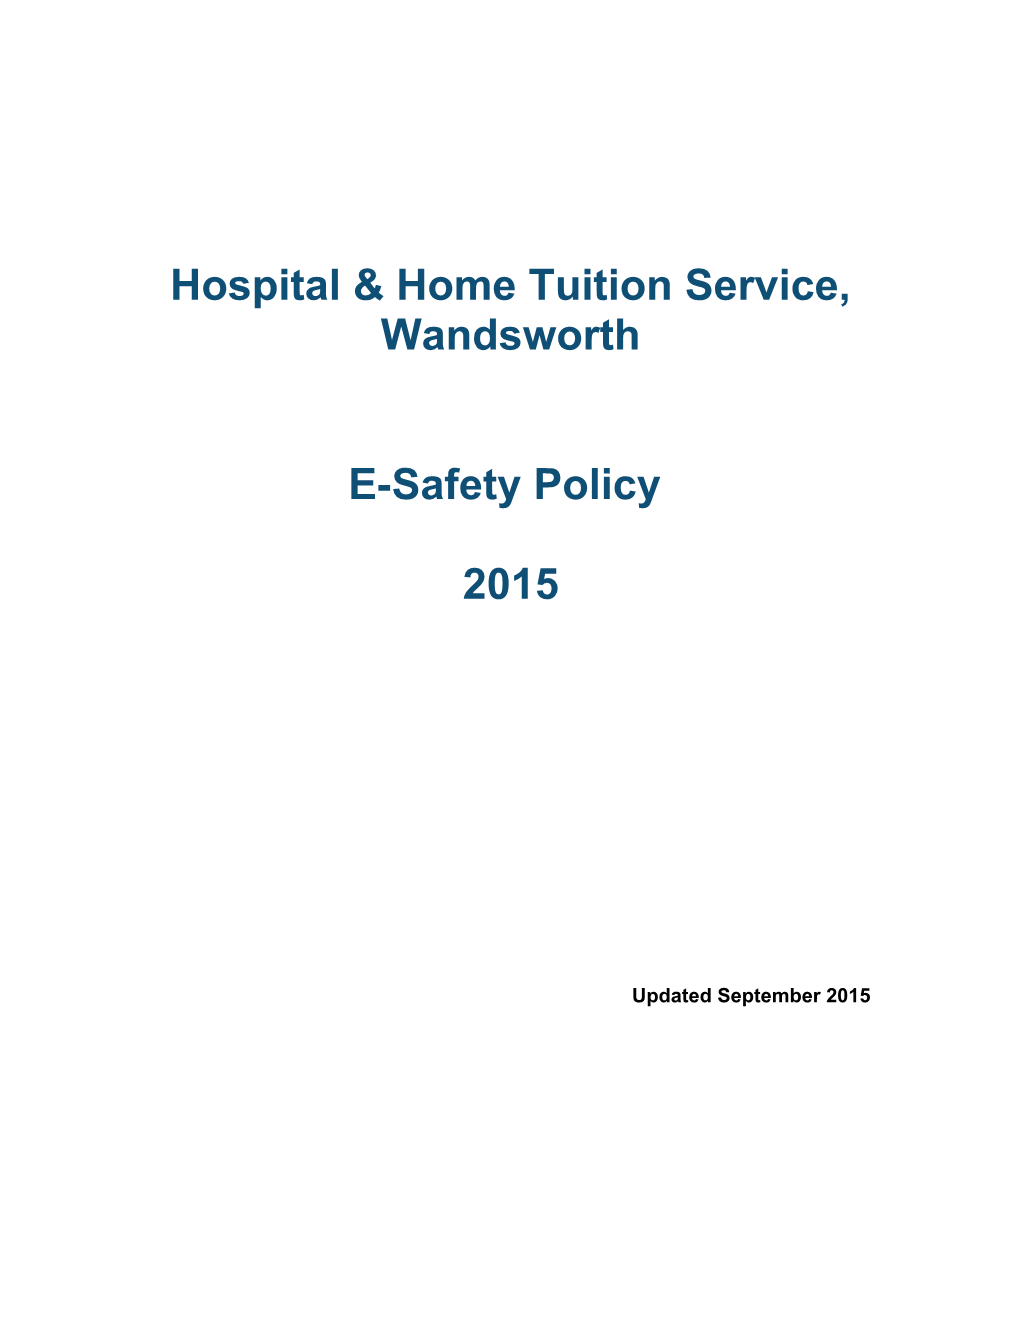 Hospital & Home Tuition Service, Wandsworth